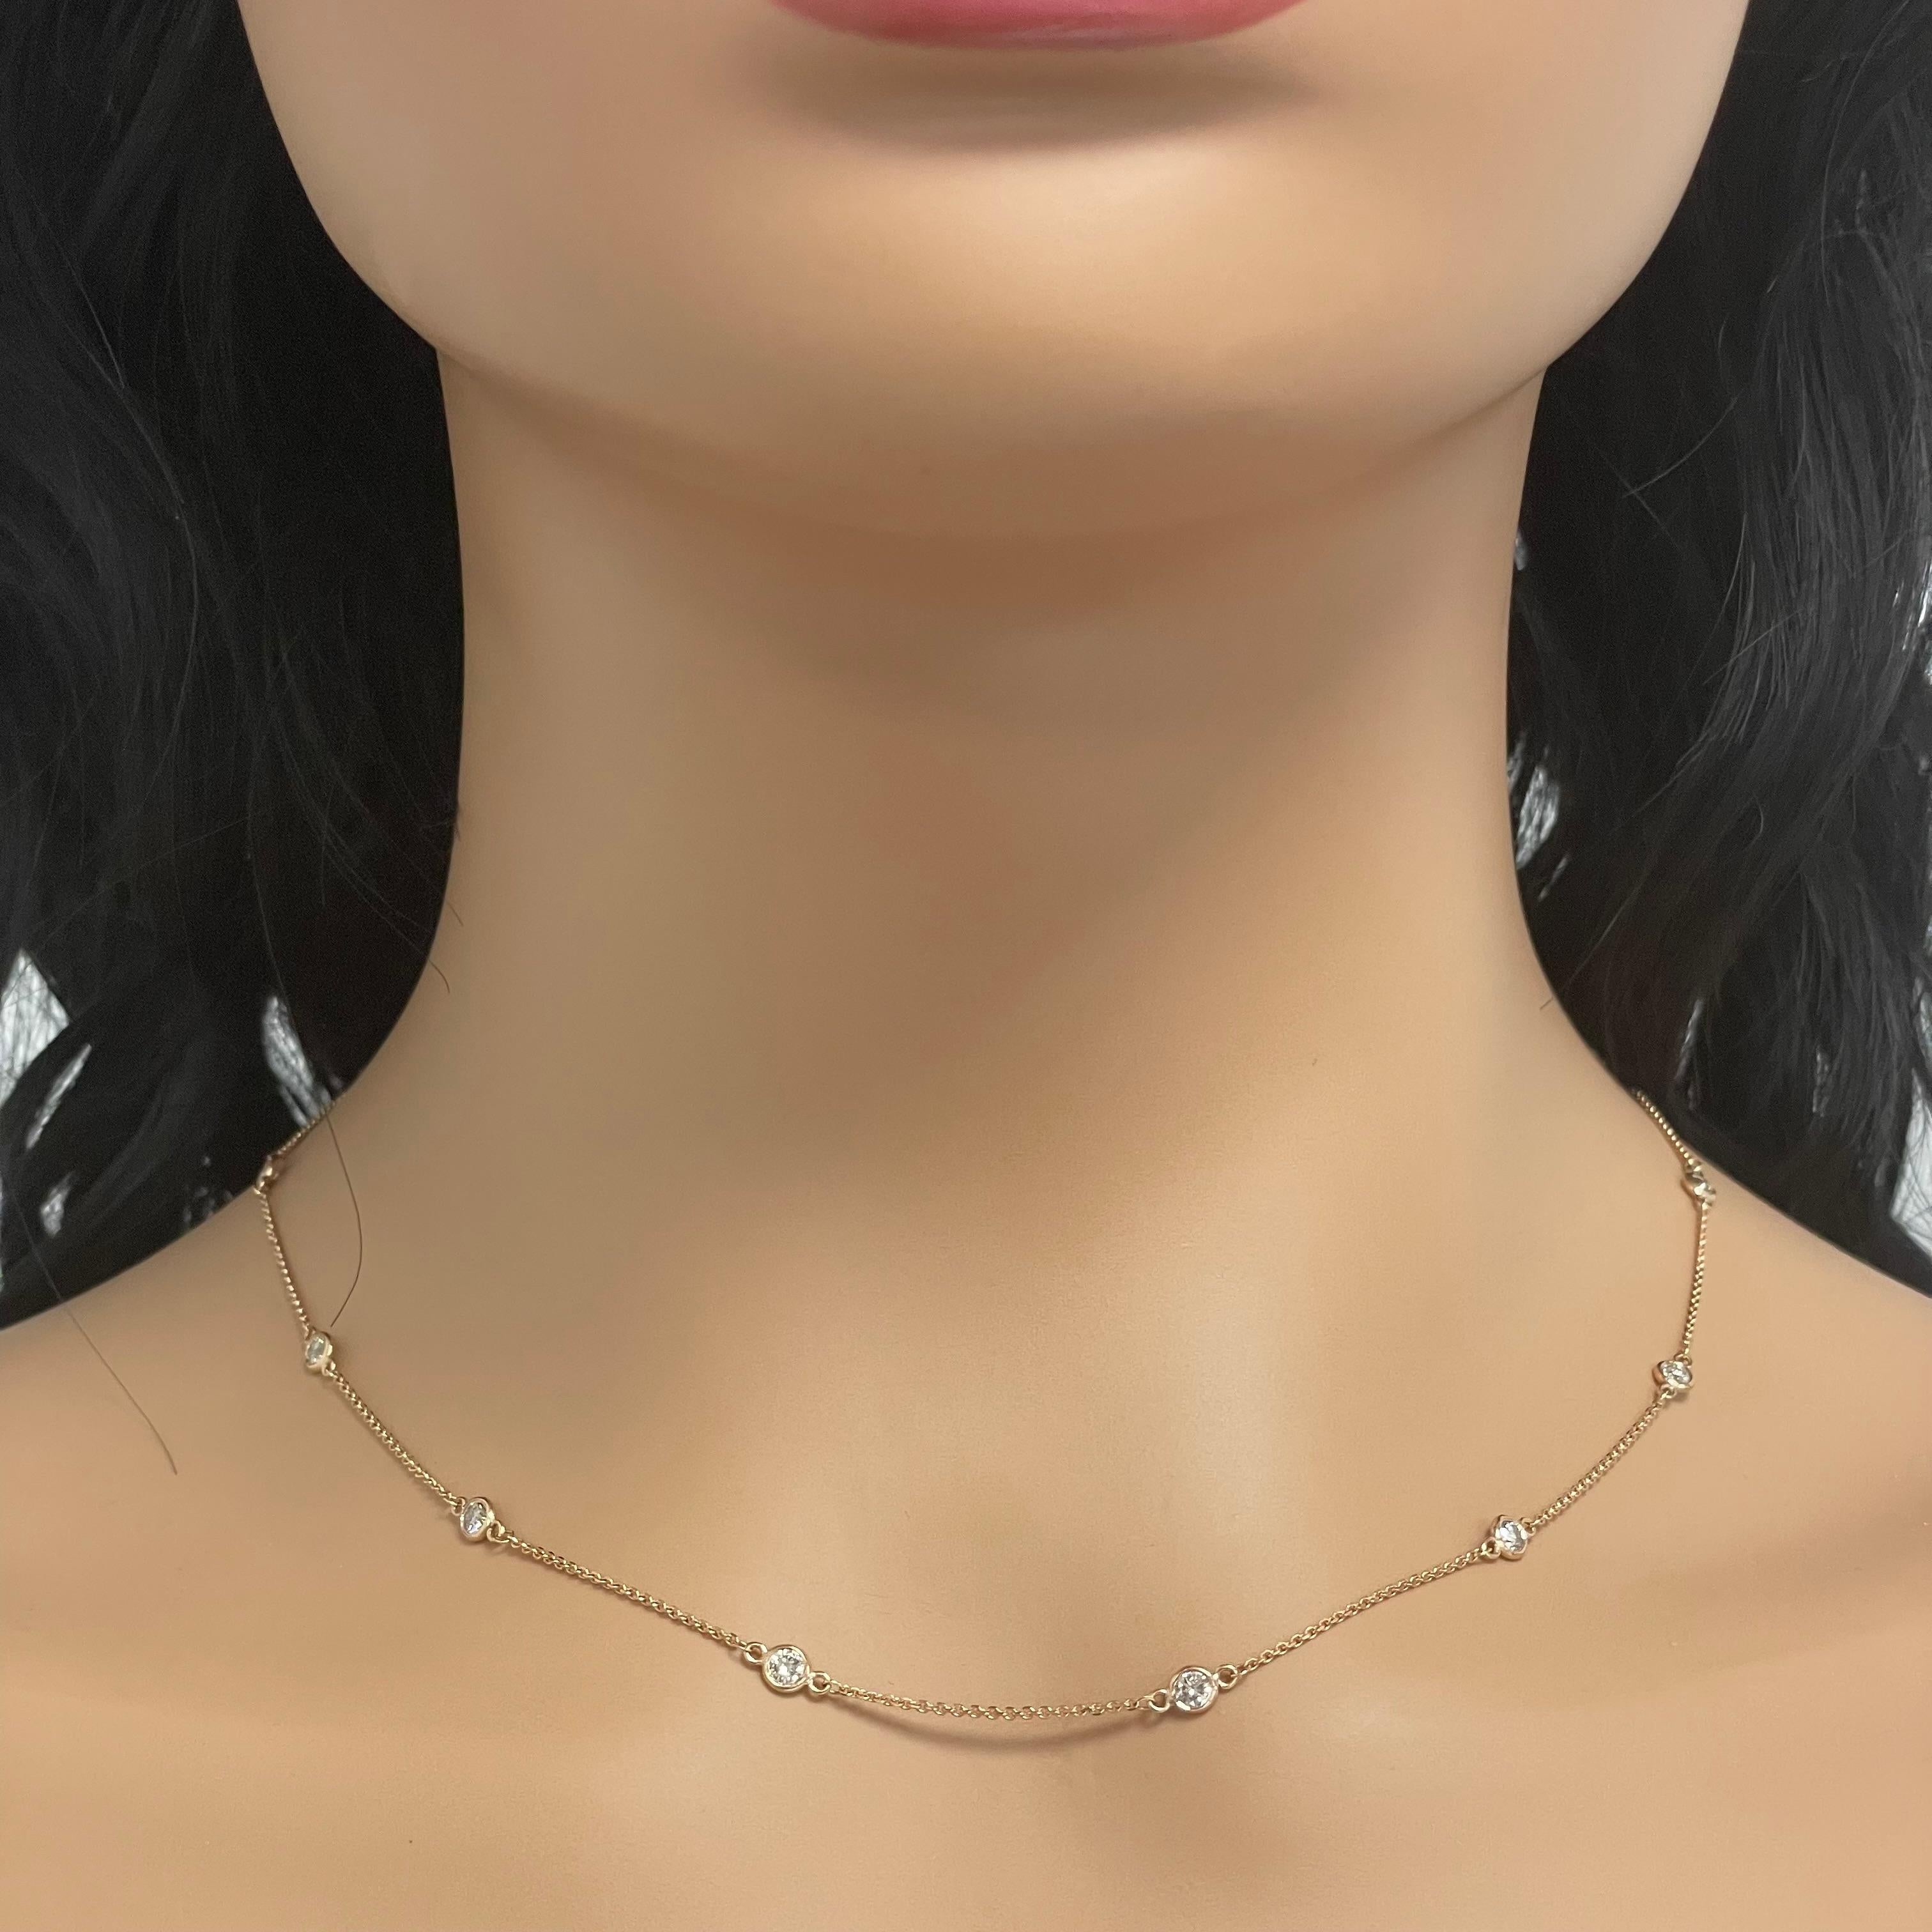 Fun & Chic this necklace is simple and sassy. It is great for daily stylish wear or an evening out. 

Diamonds Shape: Round 
Total Diamond Weight: 1.15 ct 
No. of Diamonds: 12
Diamond Color: Champagne Diamonds
Diamond Clarity: SI - I (Slightly